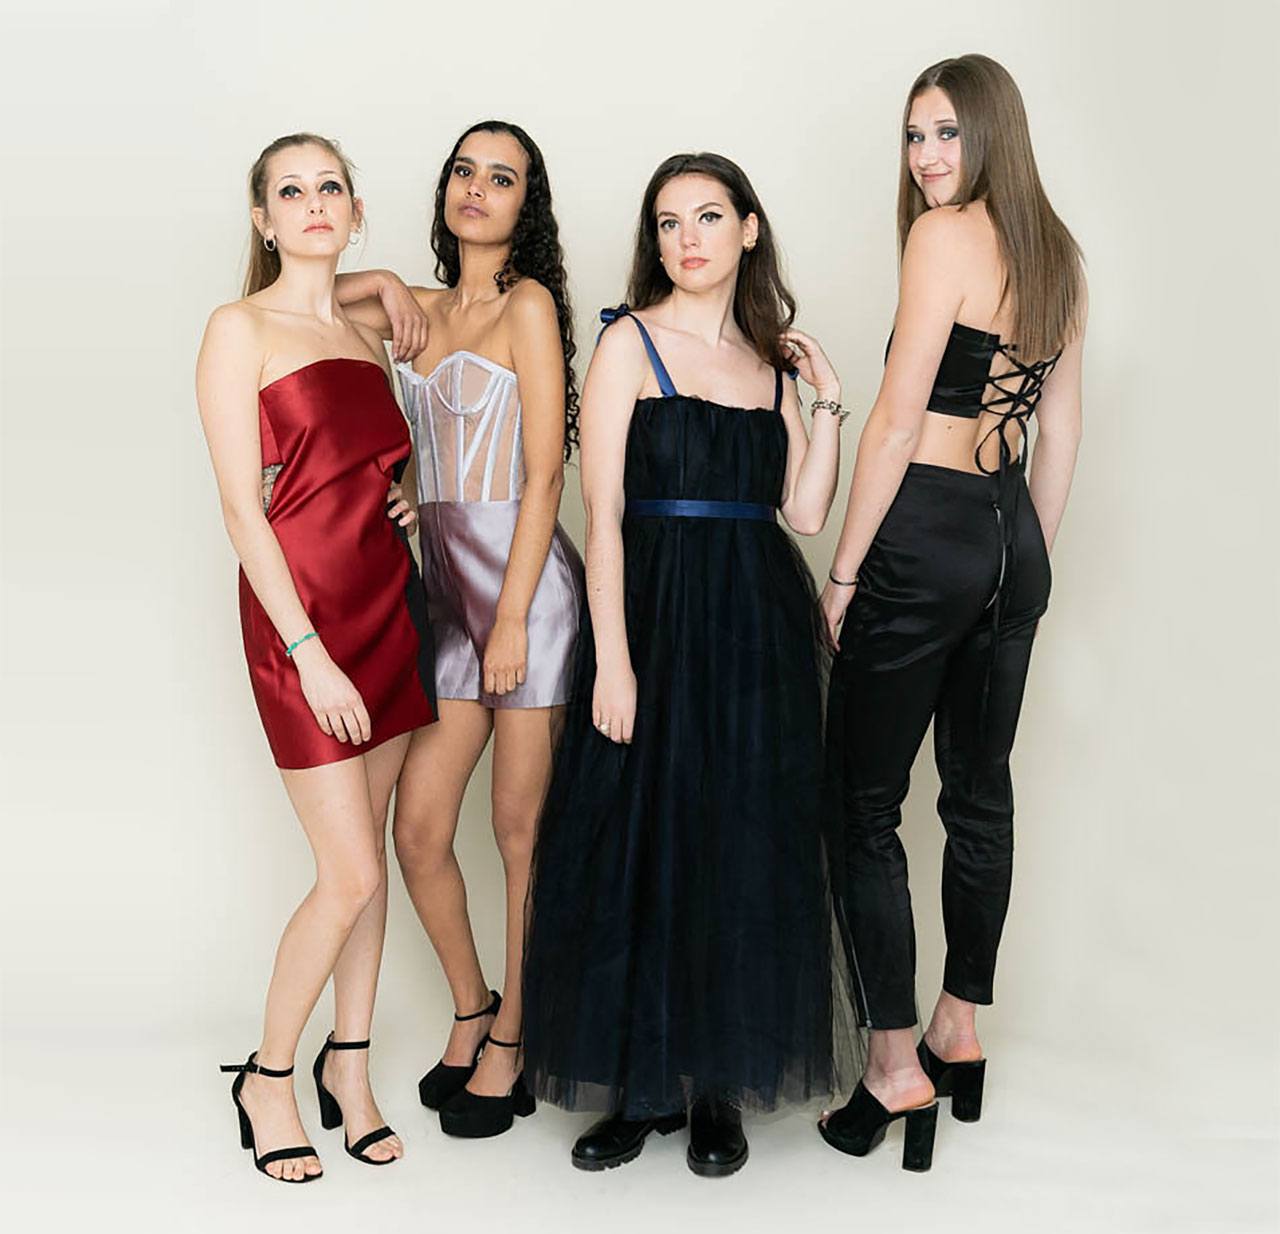 Madeline (right) and three models wearing her work.